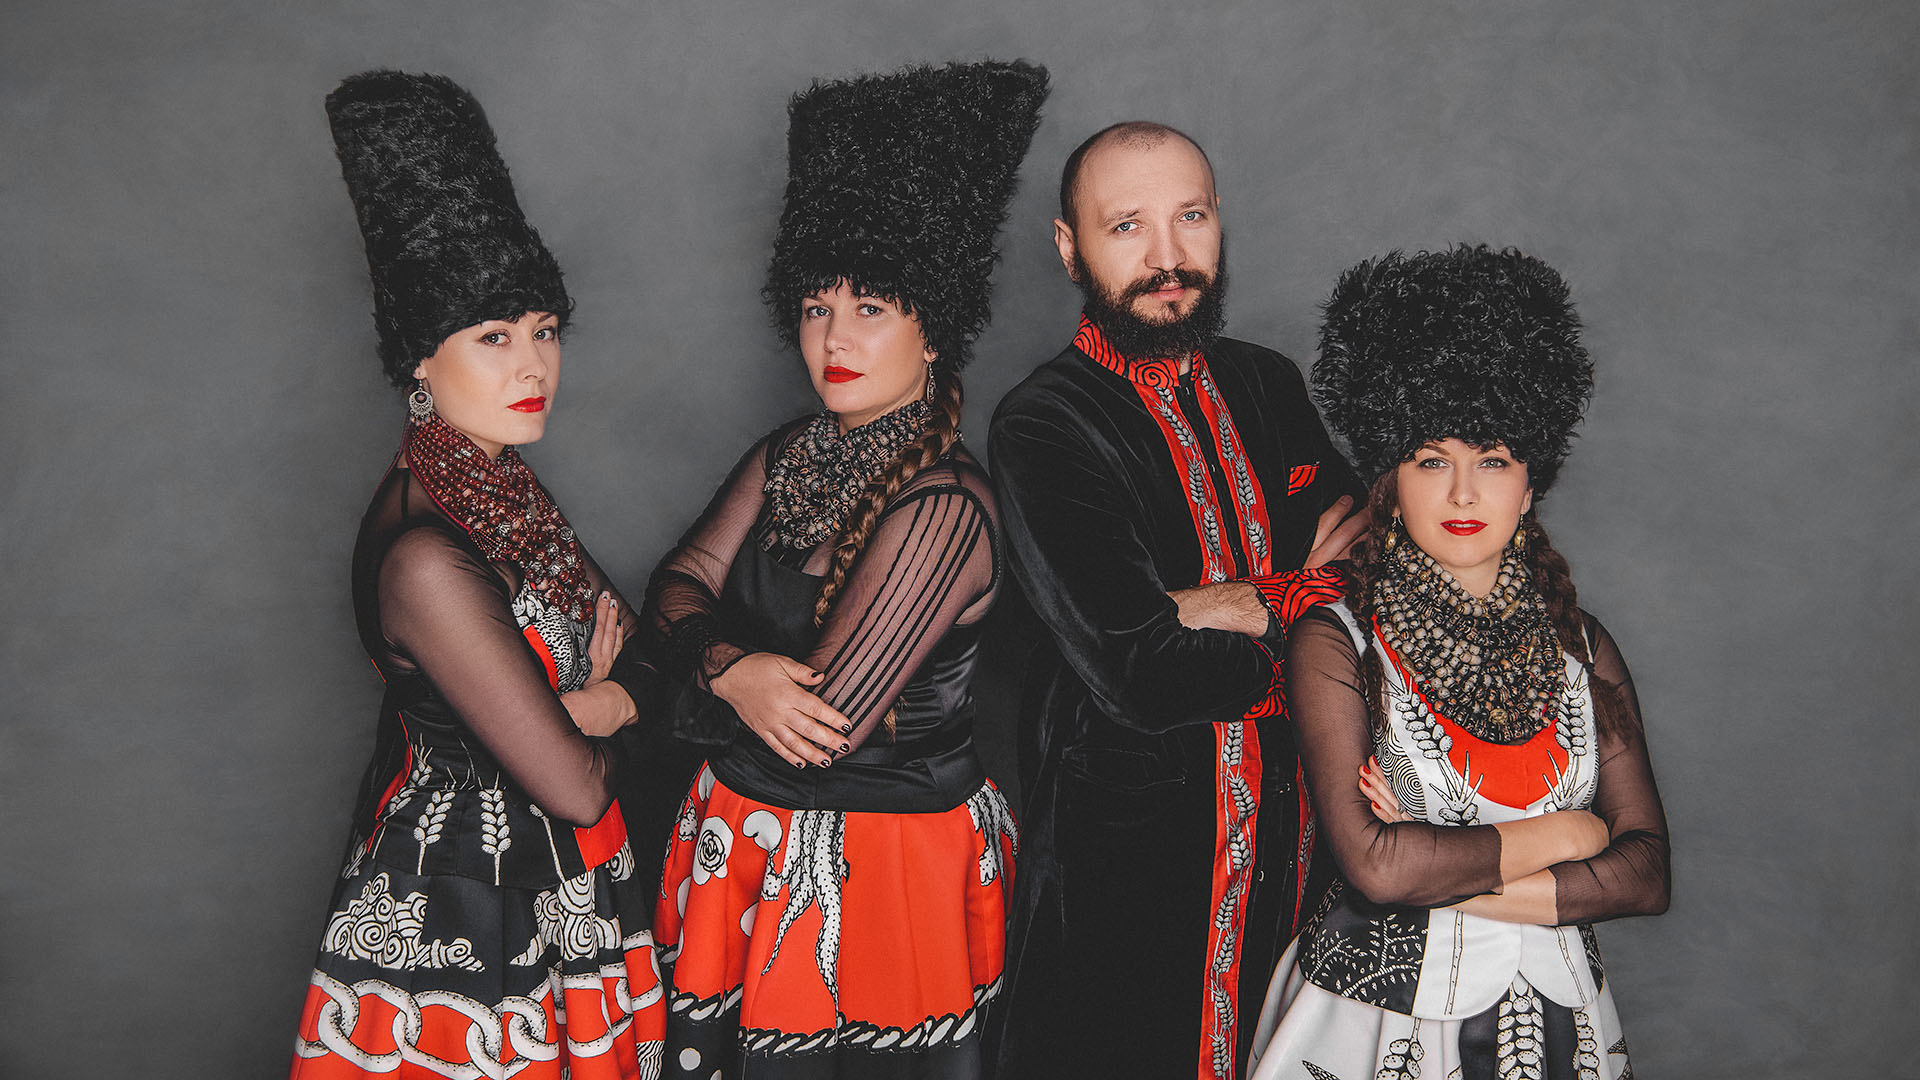 Dakha Brakha performance to deliver color, dance, energy to Bayou Theater